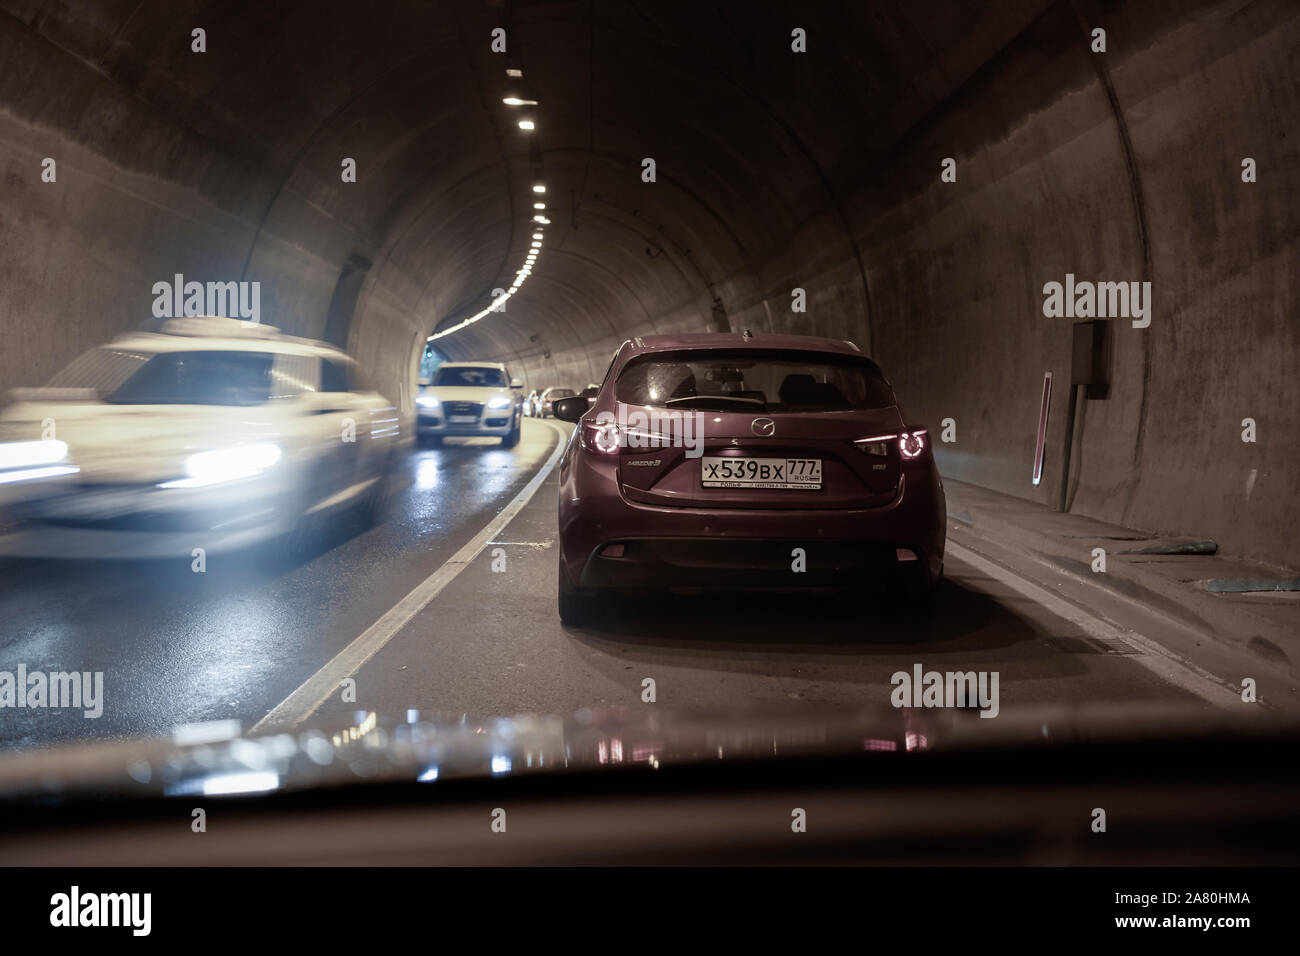 Montenegro, Sep 19, 2019: Line of cars formed in the tunnel in front of the town of Kotor Stock Photo